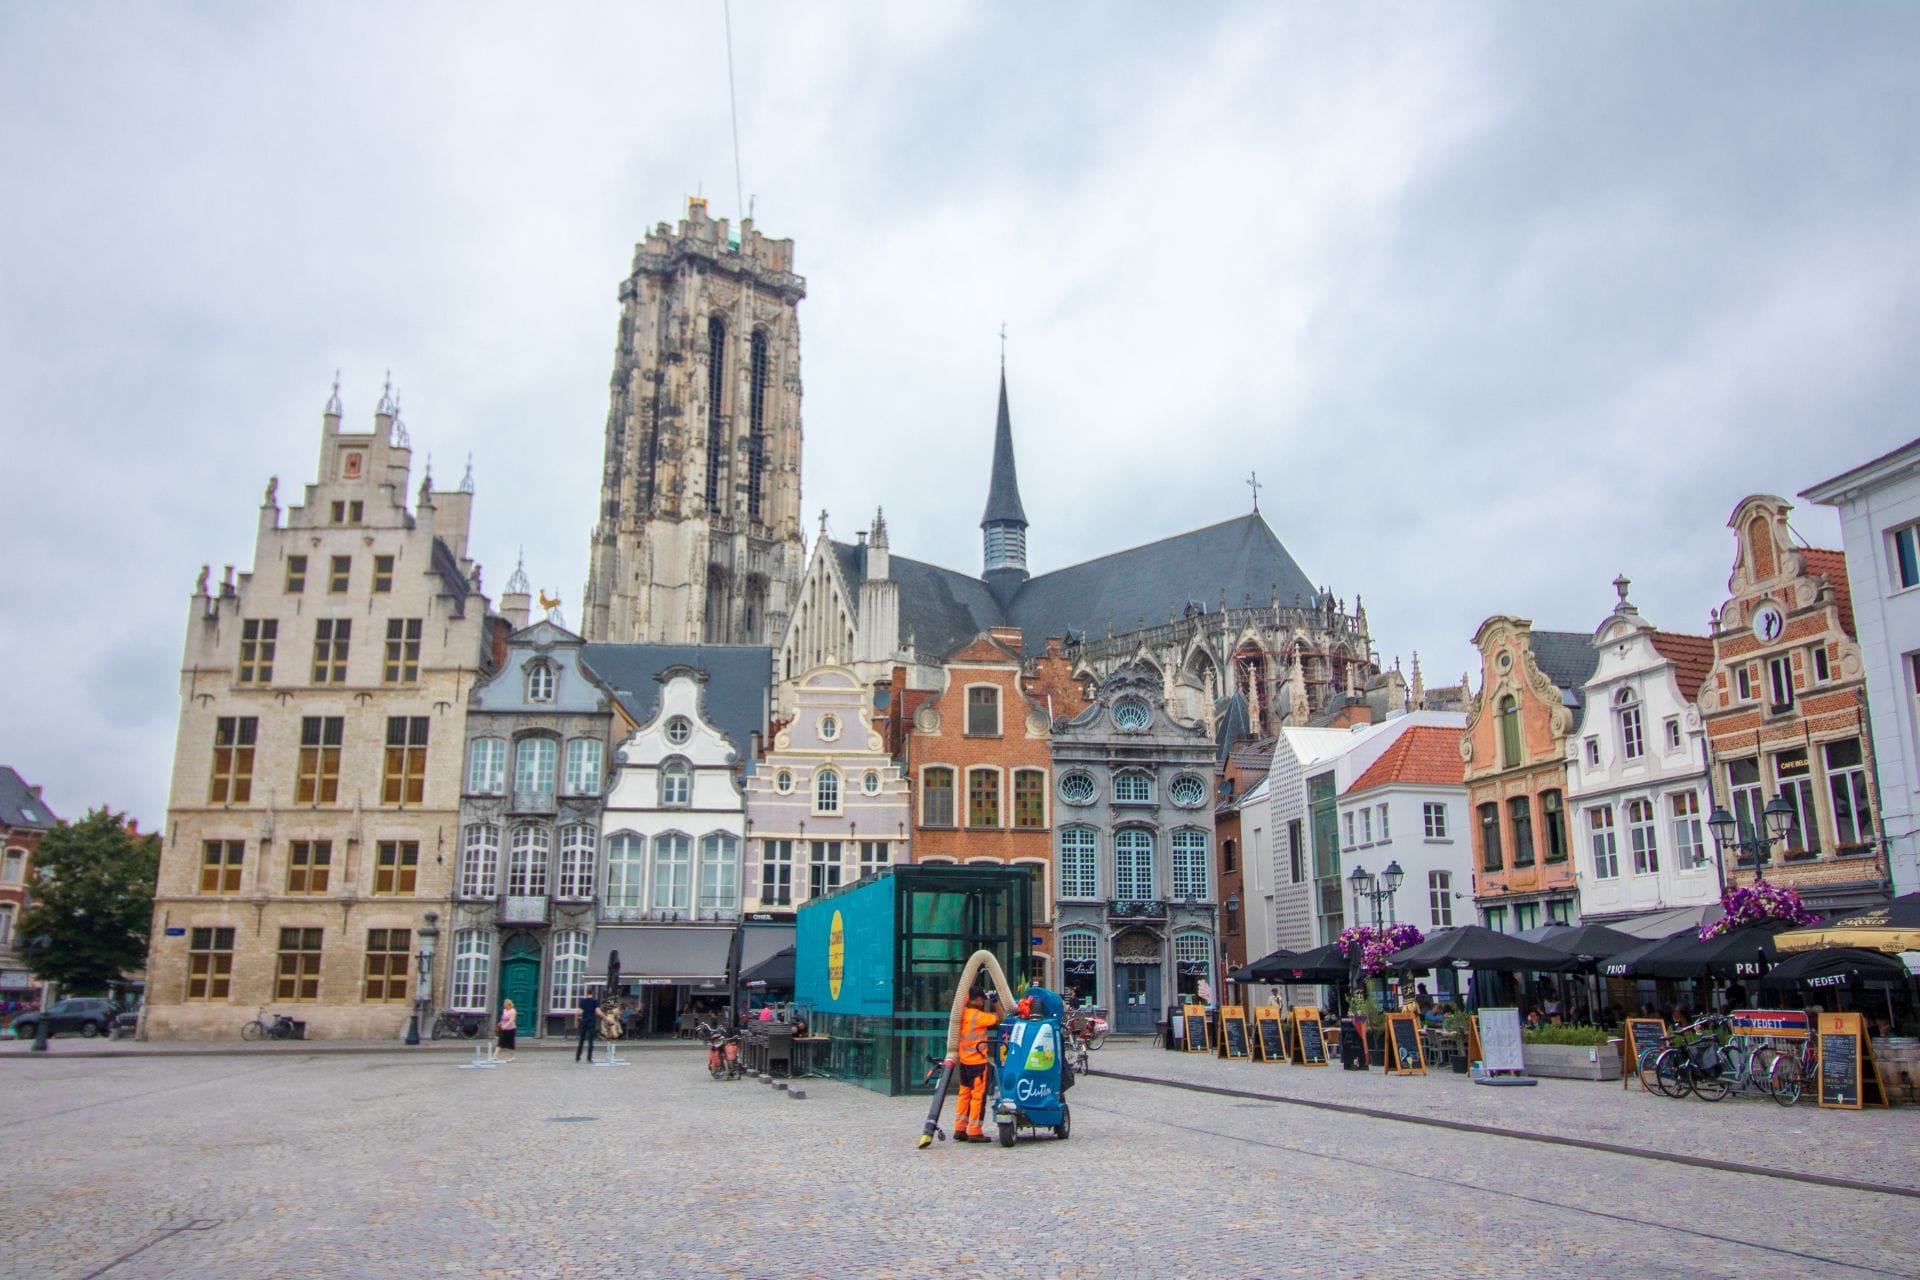 pretty-european-central-square-with-a-cathedral-colourful-buildings-and-outdoor-restaurants-grote-markt-reasons-to-visit-mechelen-belgium